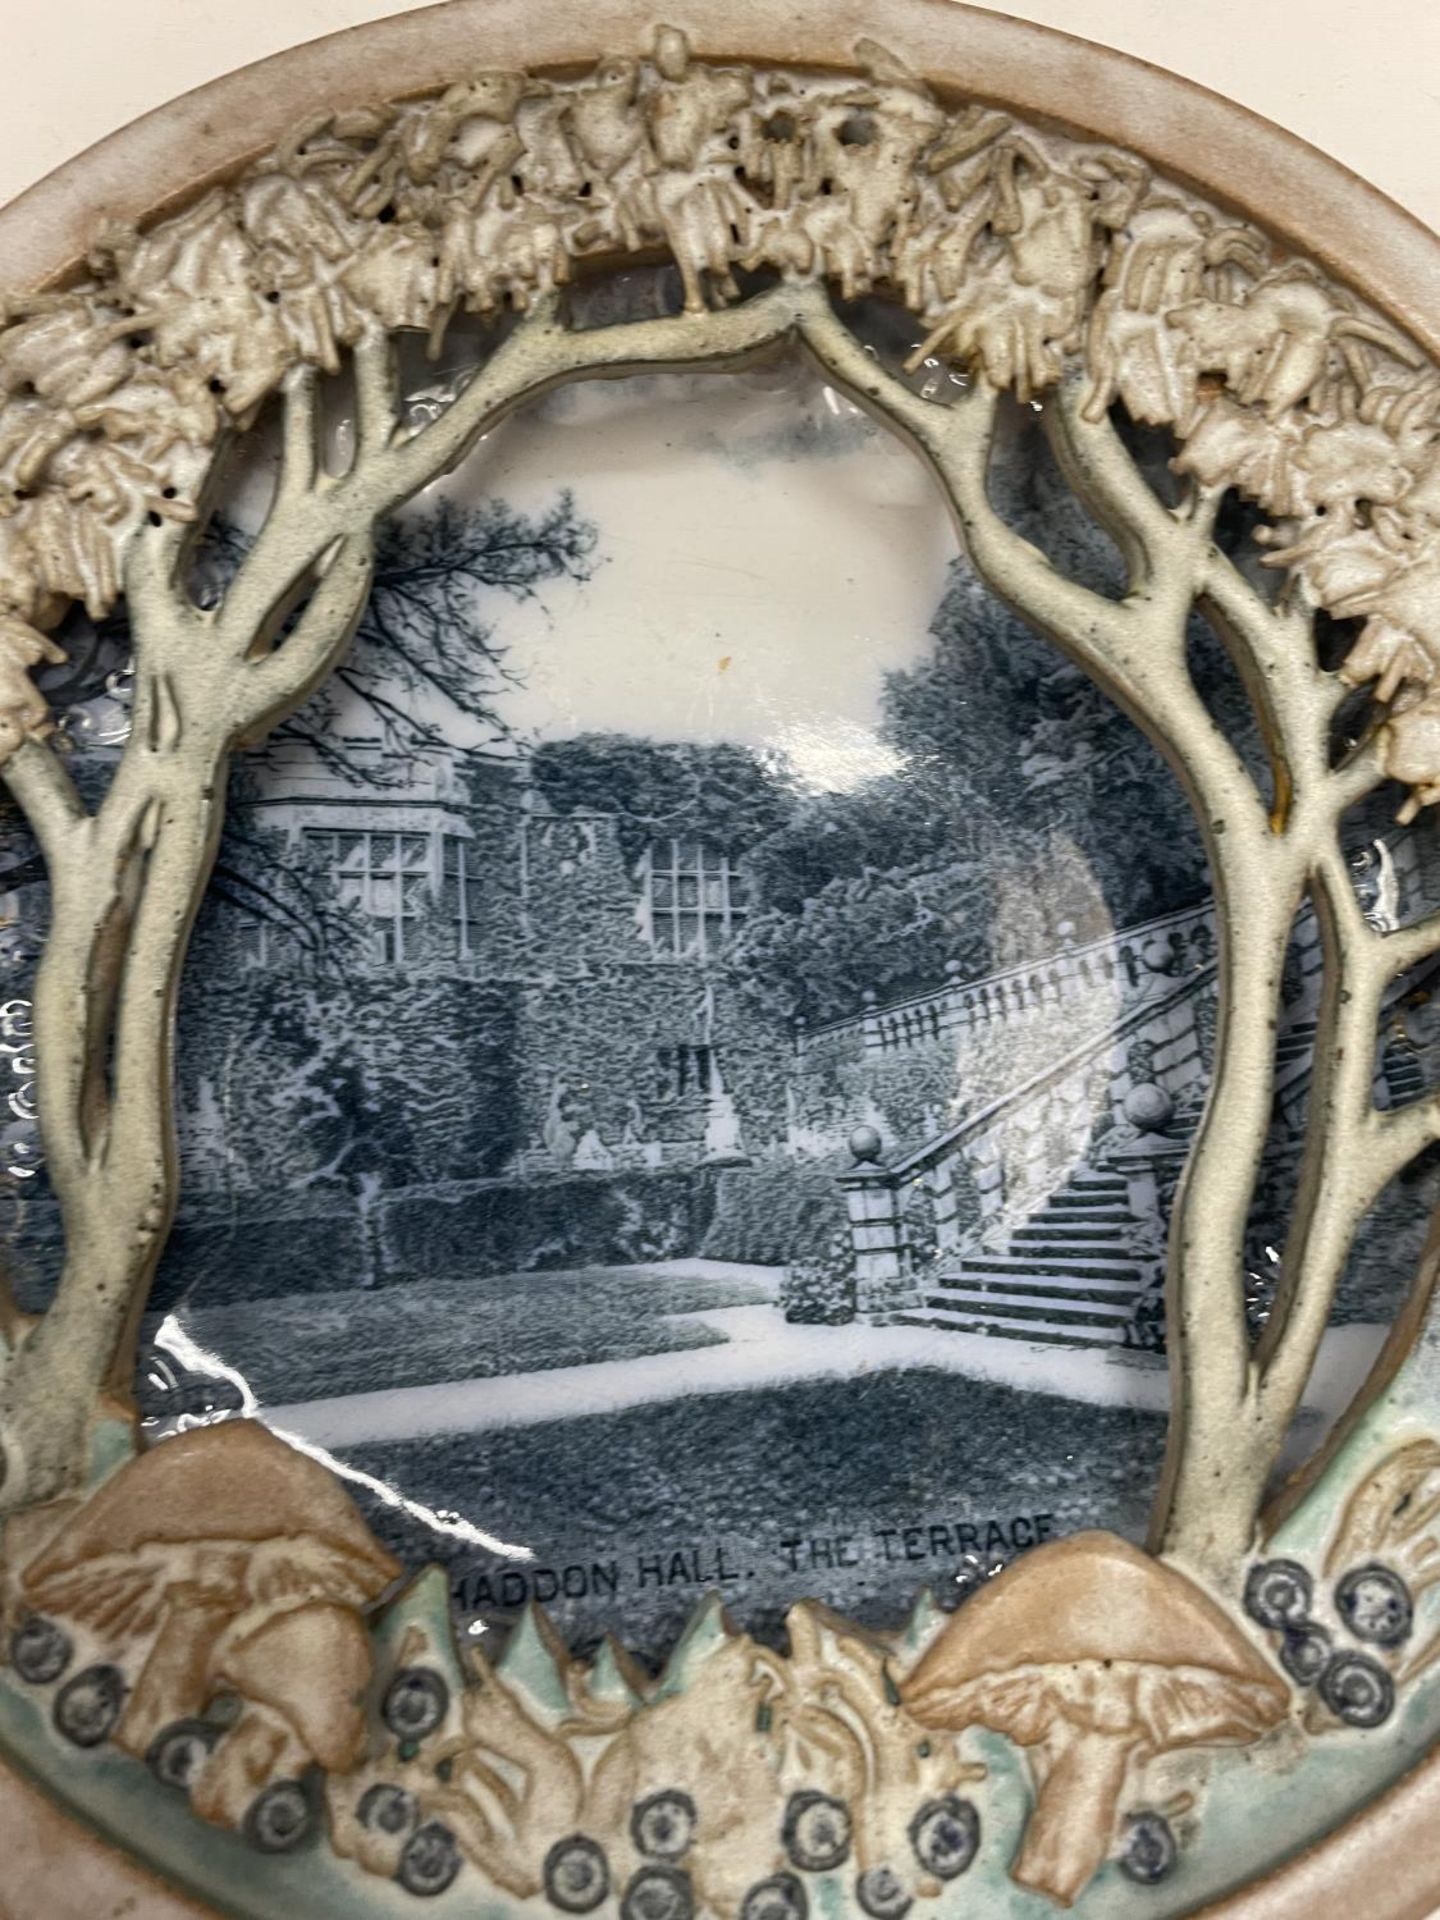 A HADDON HALL WALL PLAQUE WITH A 3D EFFECT SCENE DIAMETER 28CM - Image 6 of 9